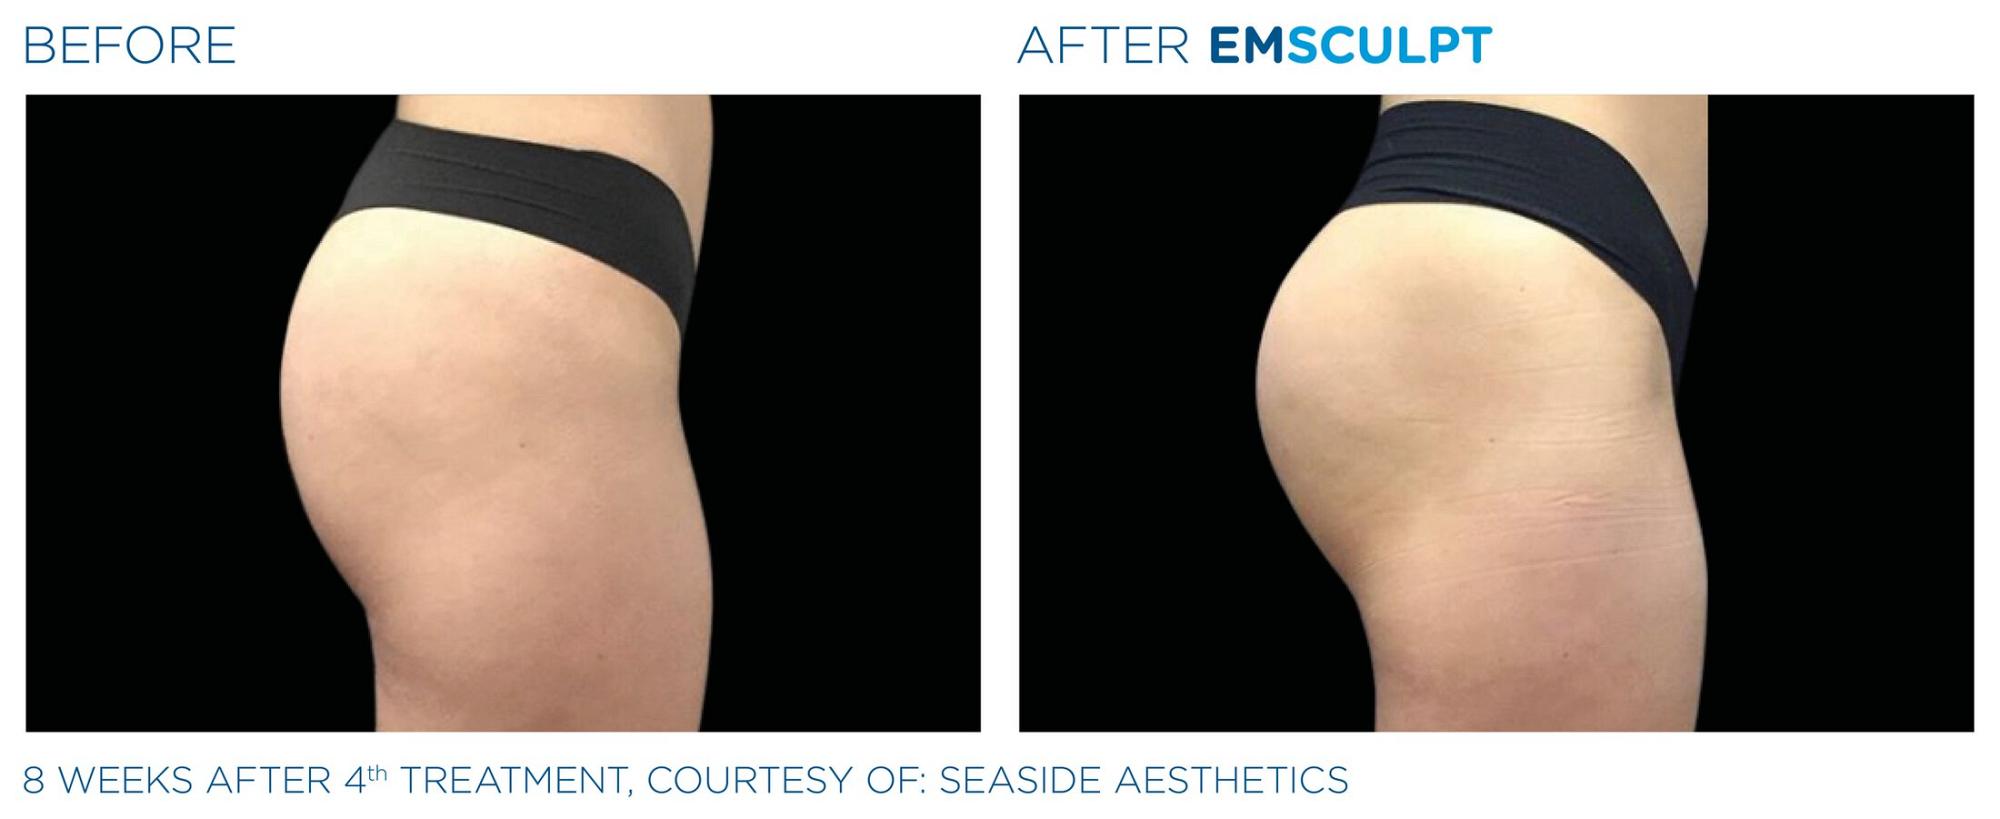 EMSculpt before and after